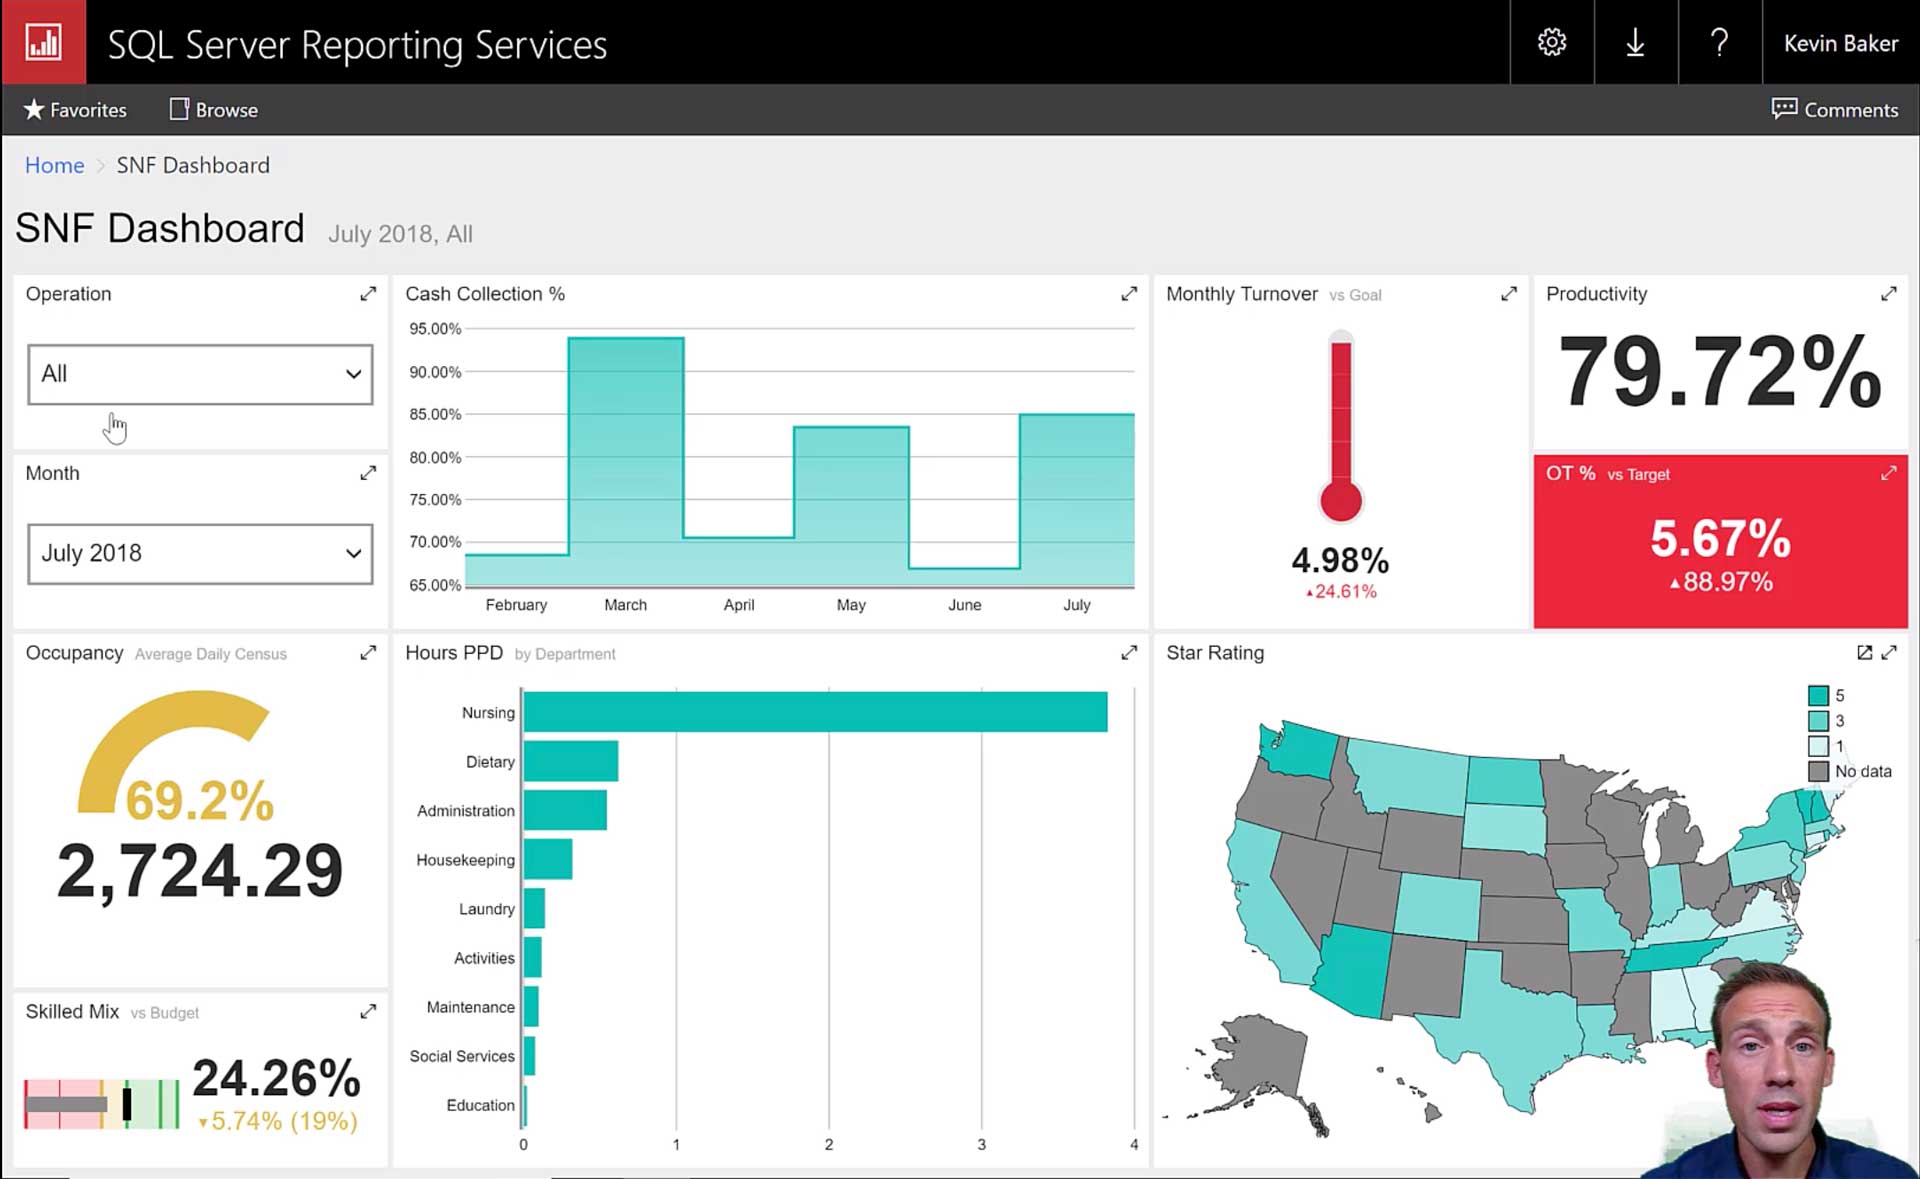 Kevin Baker, of Data Services Partners, demonstrates how using an OLAP cube allows Skilled Nursing Facilities to visualize their data in mobile reports. This example uses mock nationwide data to demonstrate how a SNF administrator or executive can quickly view key metrics in their mobile device or any screen. Connect to Power BI, Mobile Reports, Domo, Tableau, or any other visualization platform. Systems like Point Click Care (PCC) have Data Relays that can act as a data source for data warehouses. These data warehouses can be automated to populate pivot table style reports that let you look at facts from many different dimensions. For more information on automating data for management tools and reporting for your skilled nursing facility or post acute healthcare facility, contact Data Services Partners today! www.DataServicesPartners.com